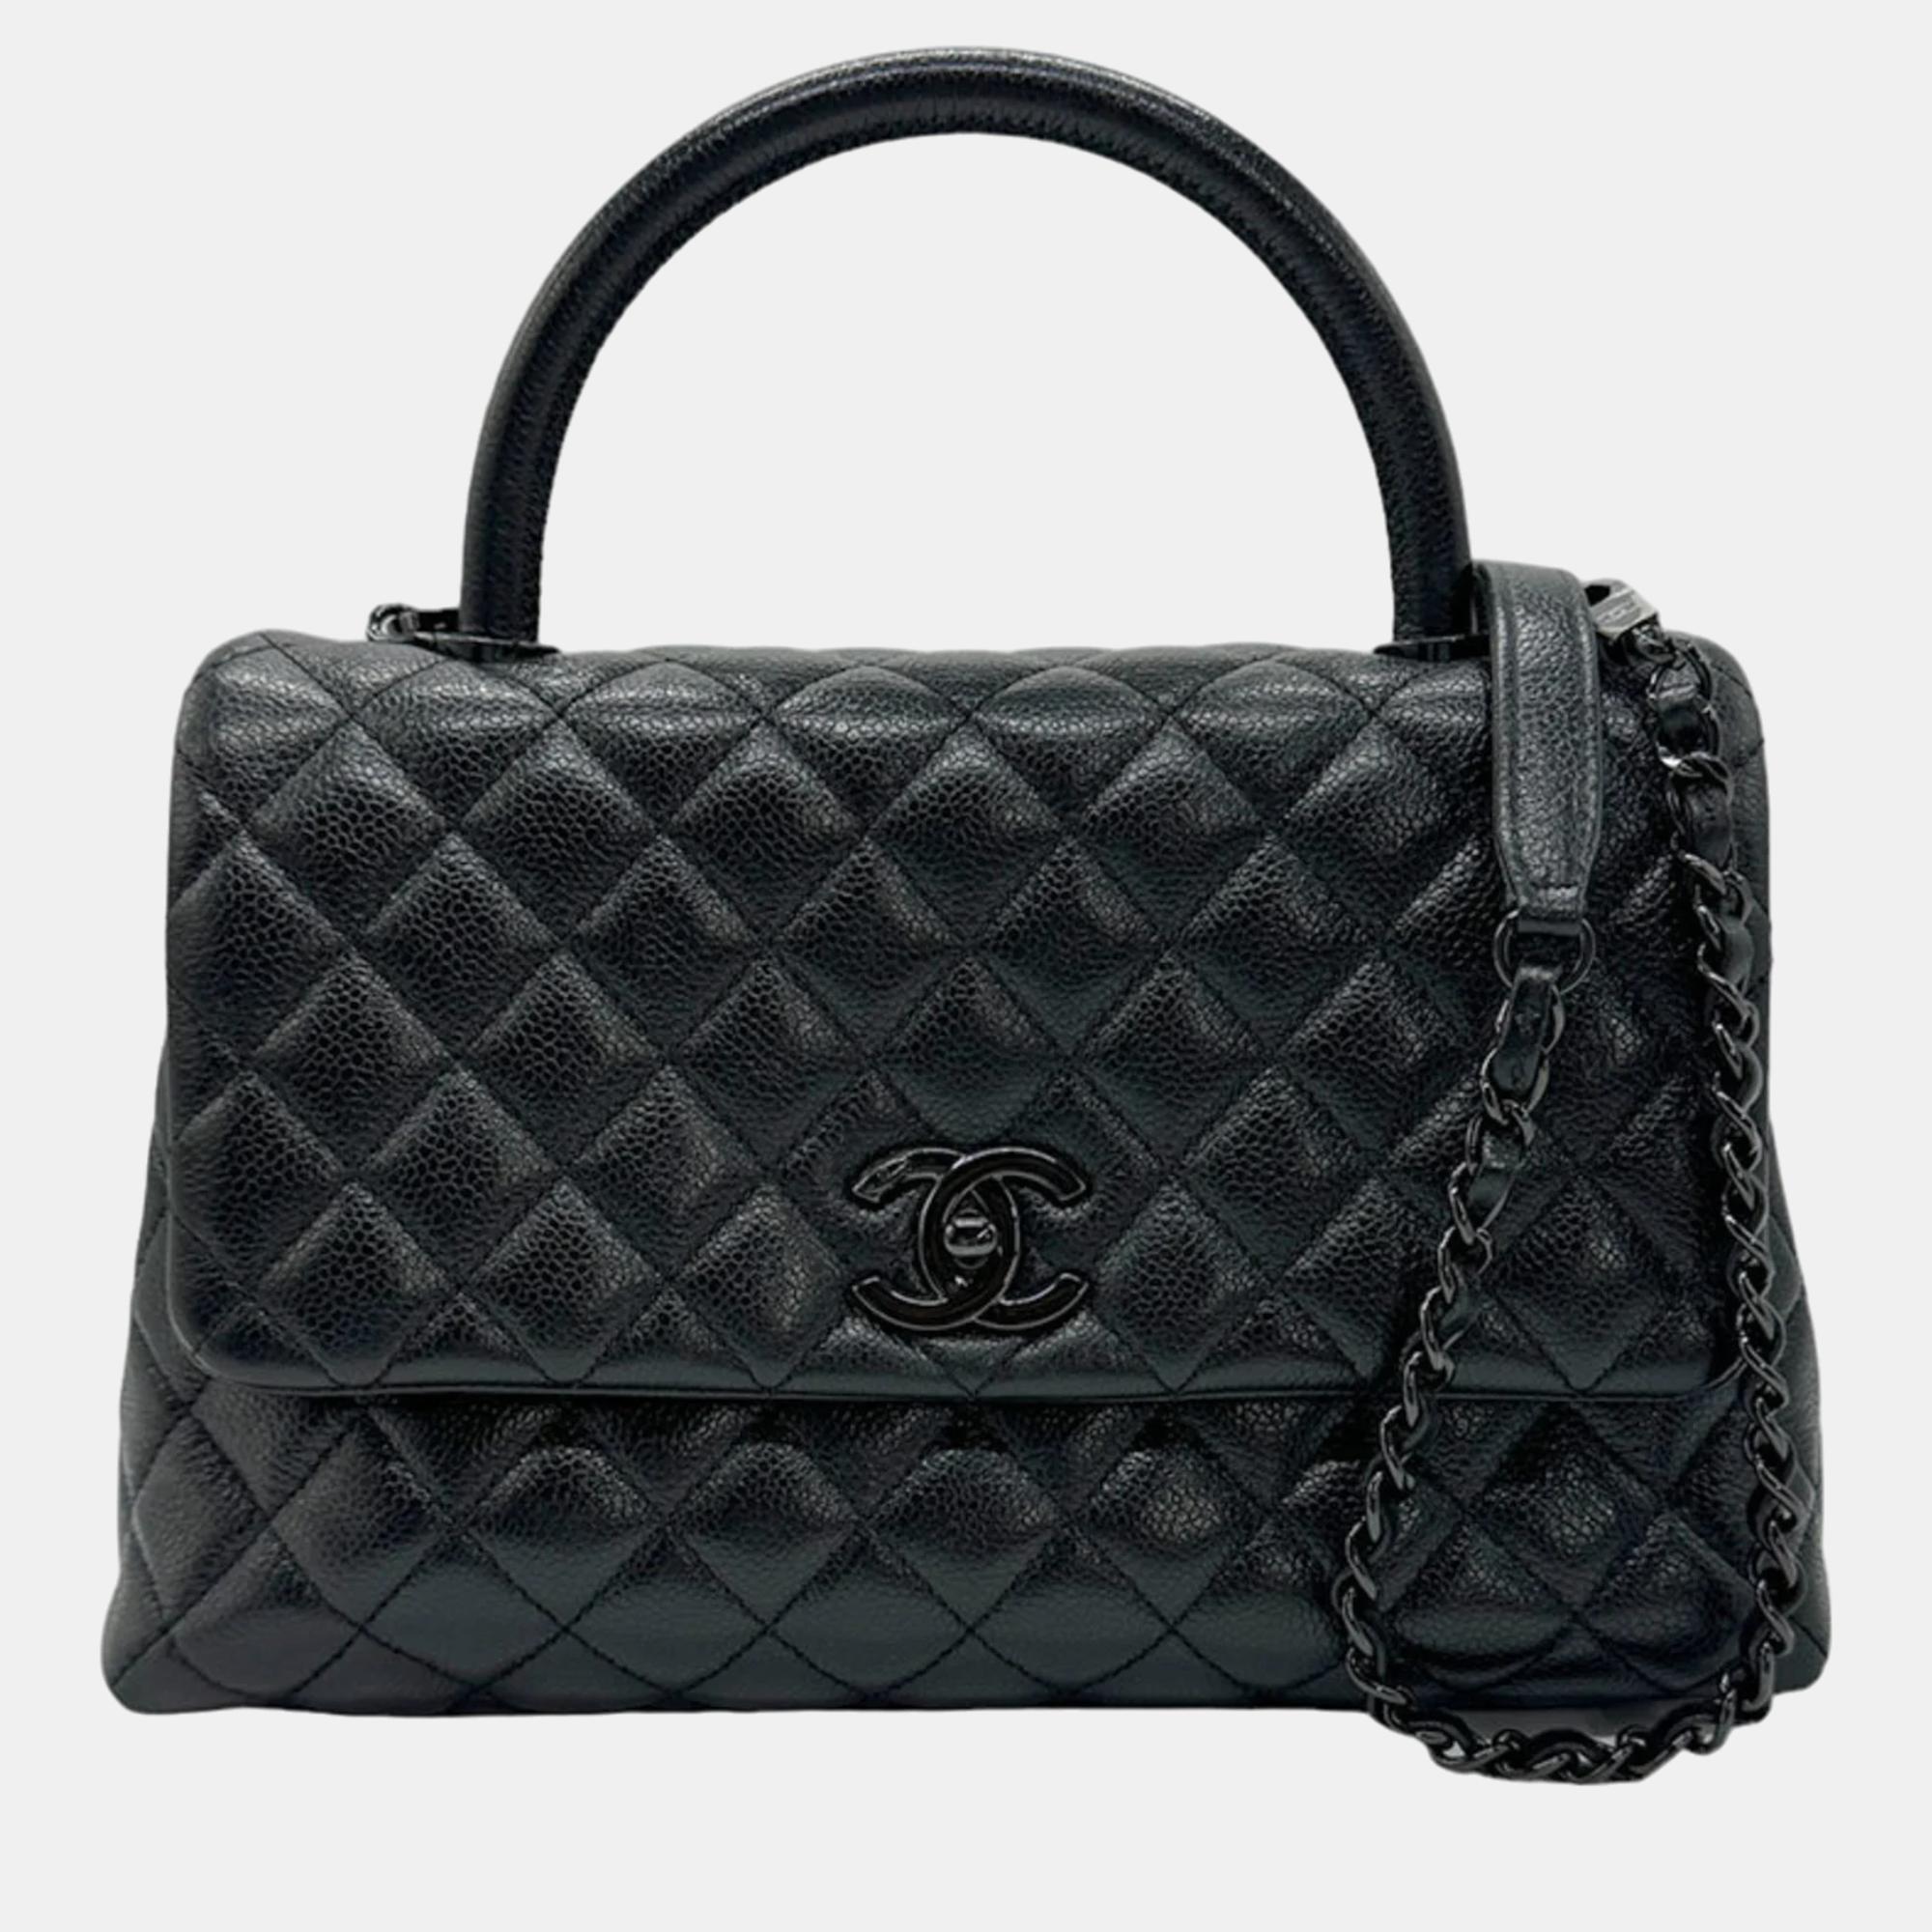 Chanel black leather small coco handle top handle bag